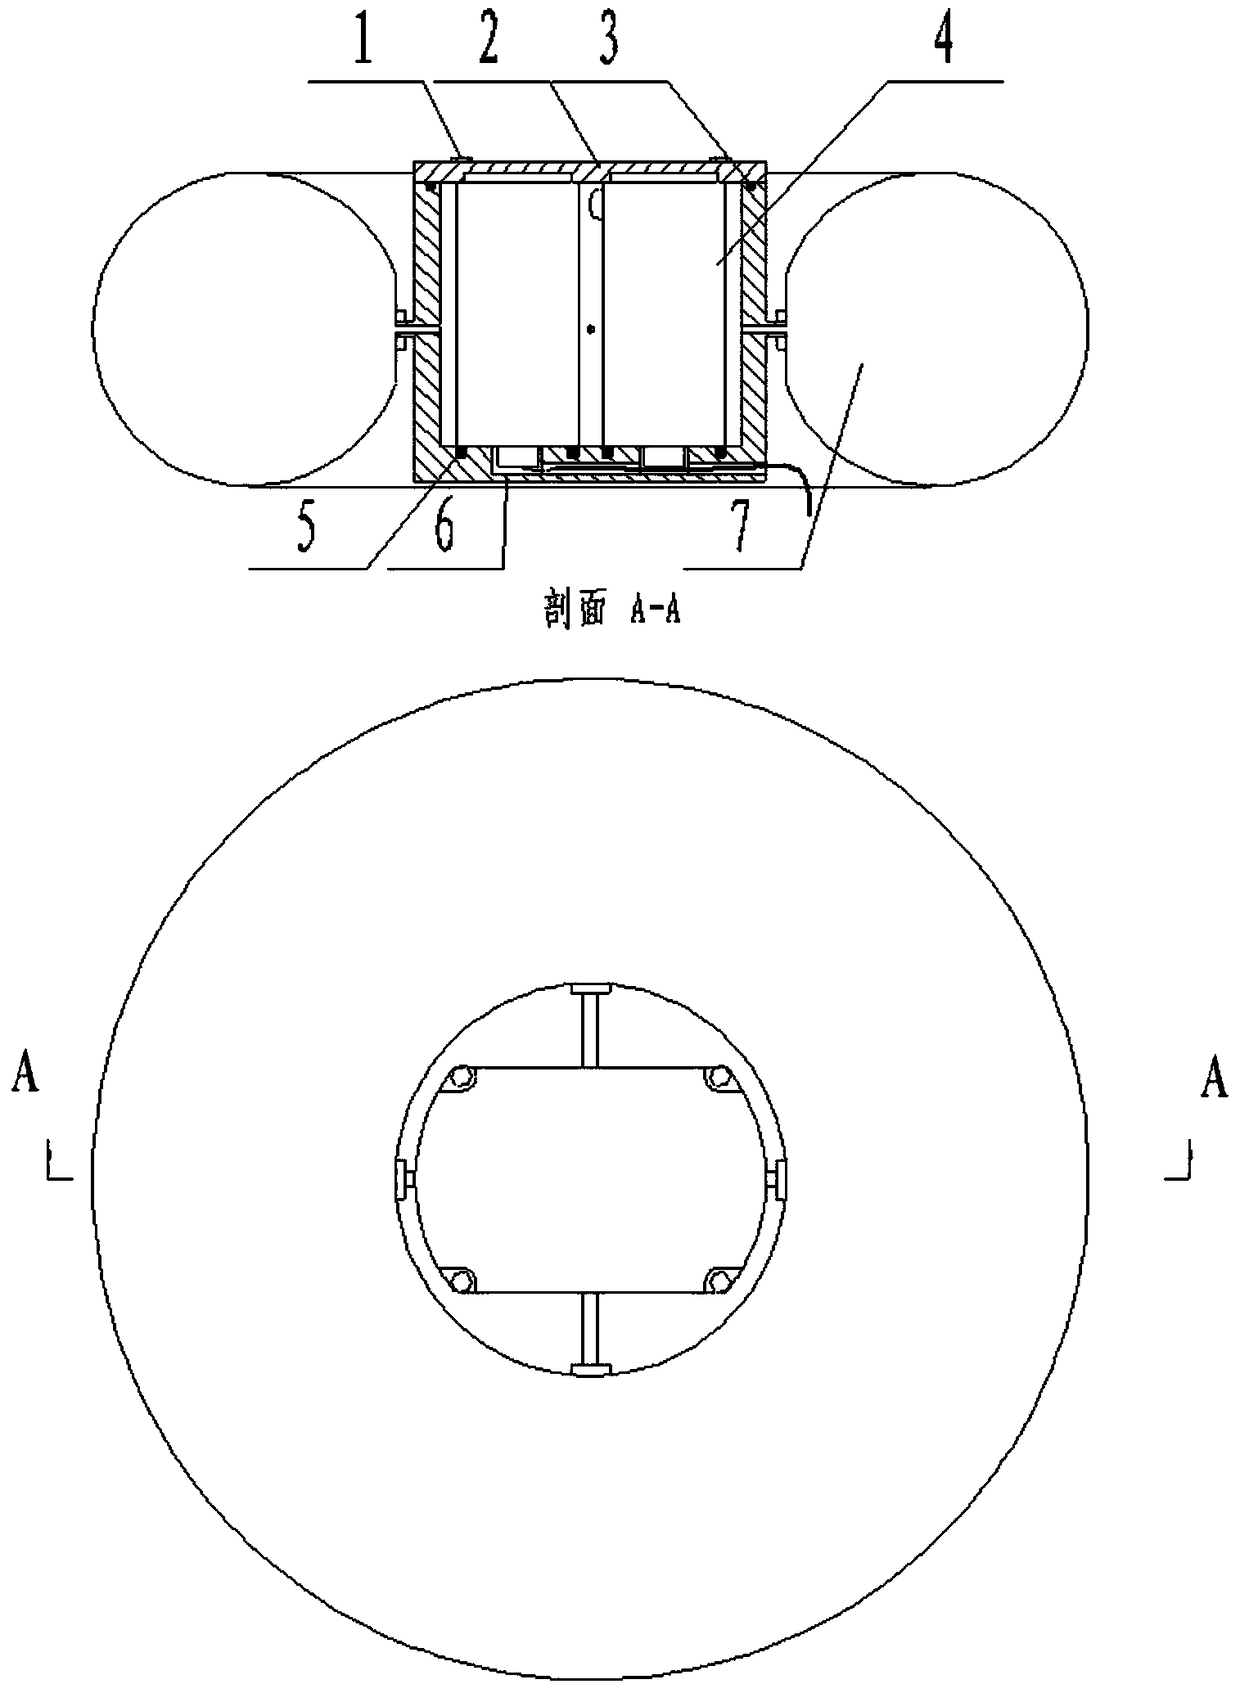 An annular airbag quick inflation device